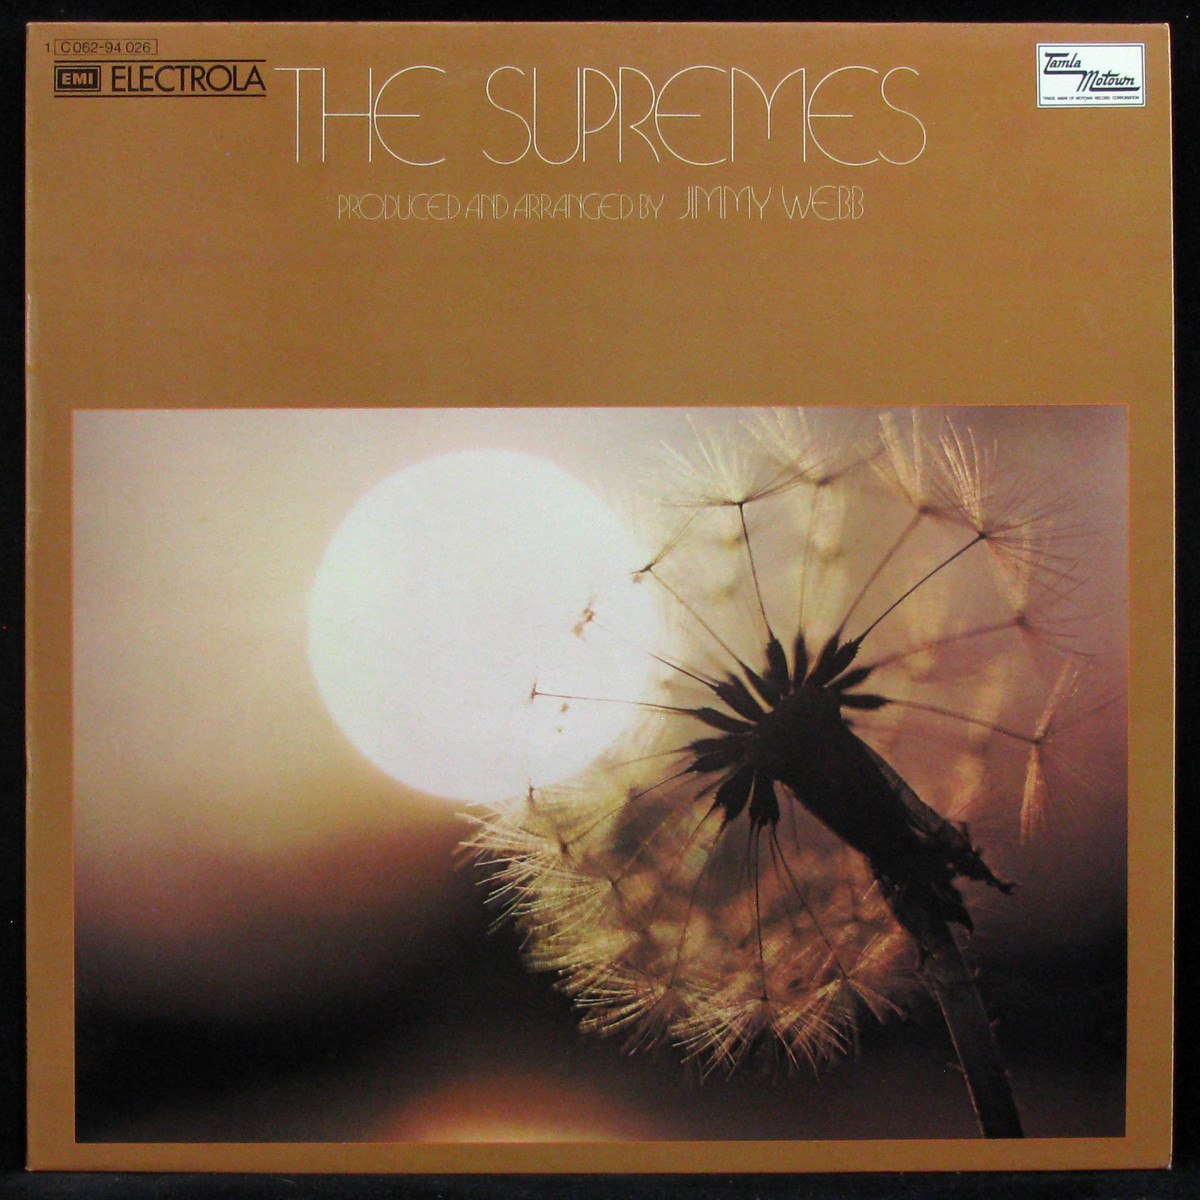 Supremes Produced And Arranged By Jimmy Webb